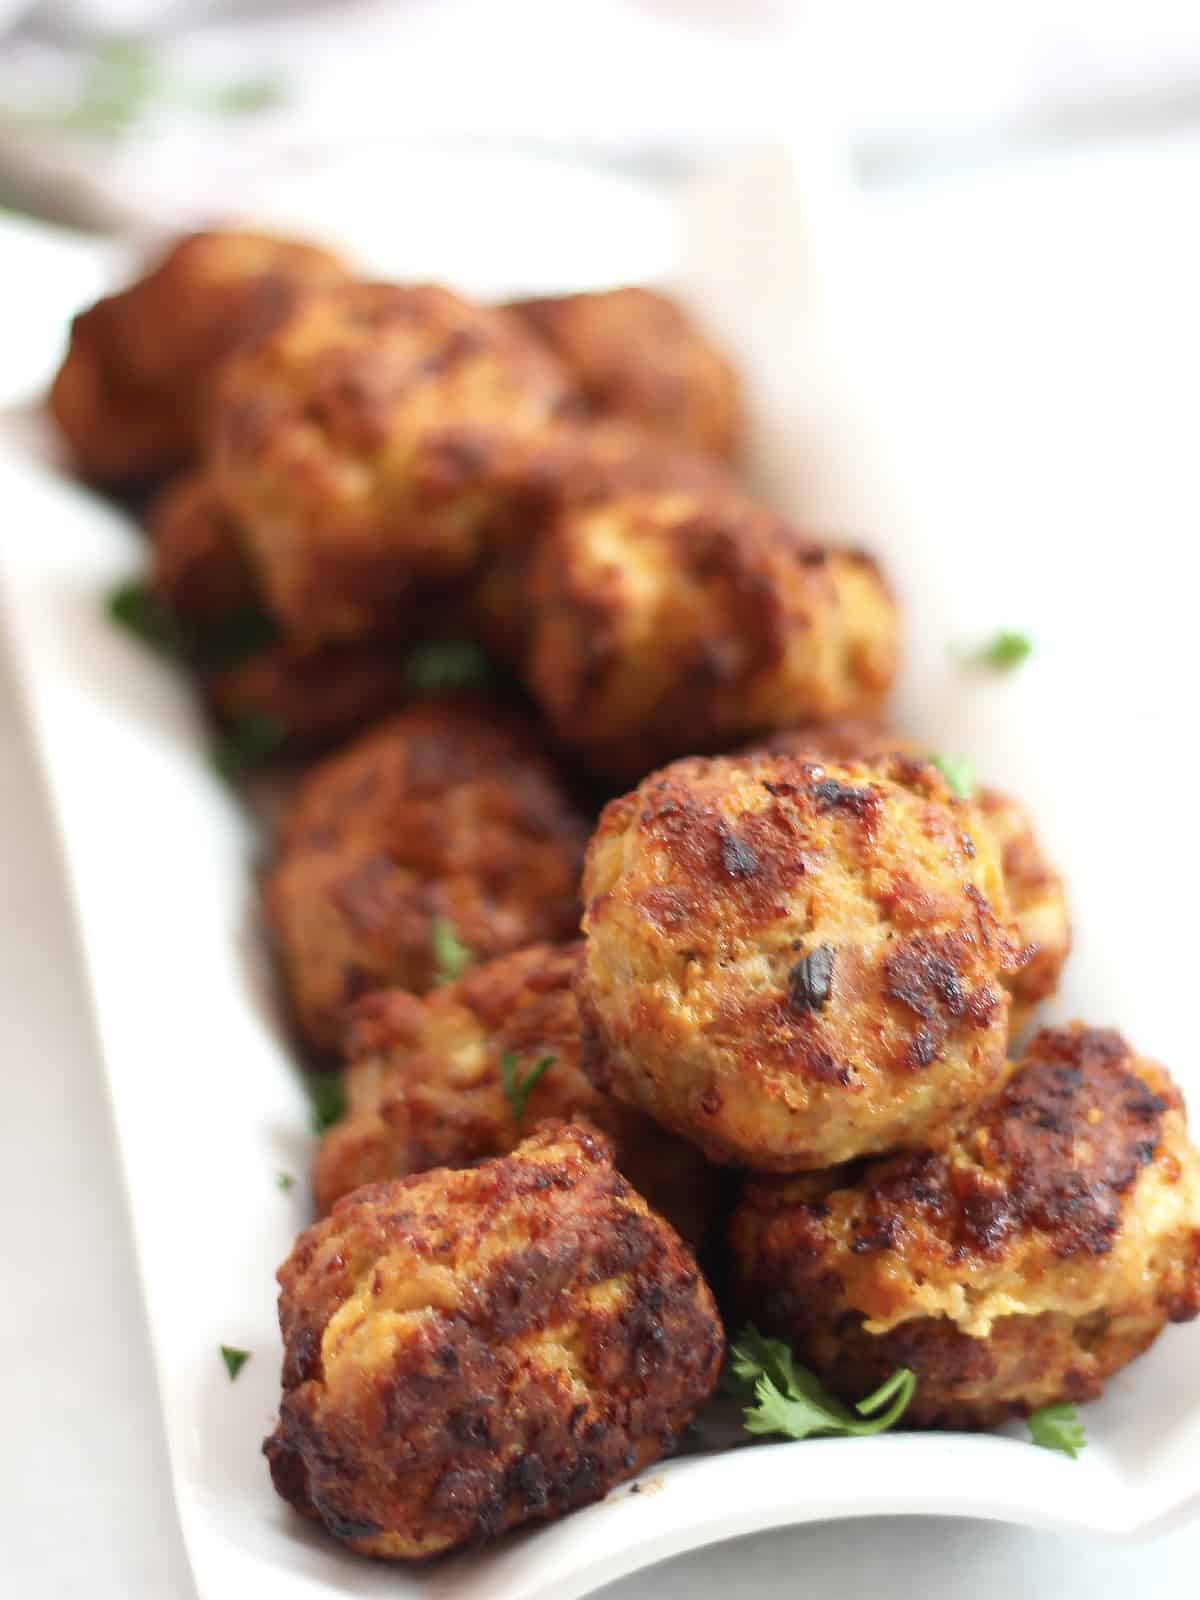 Air fried meatballs on a white plate garnished with fresh parsley.